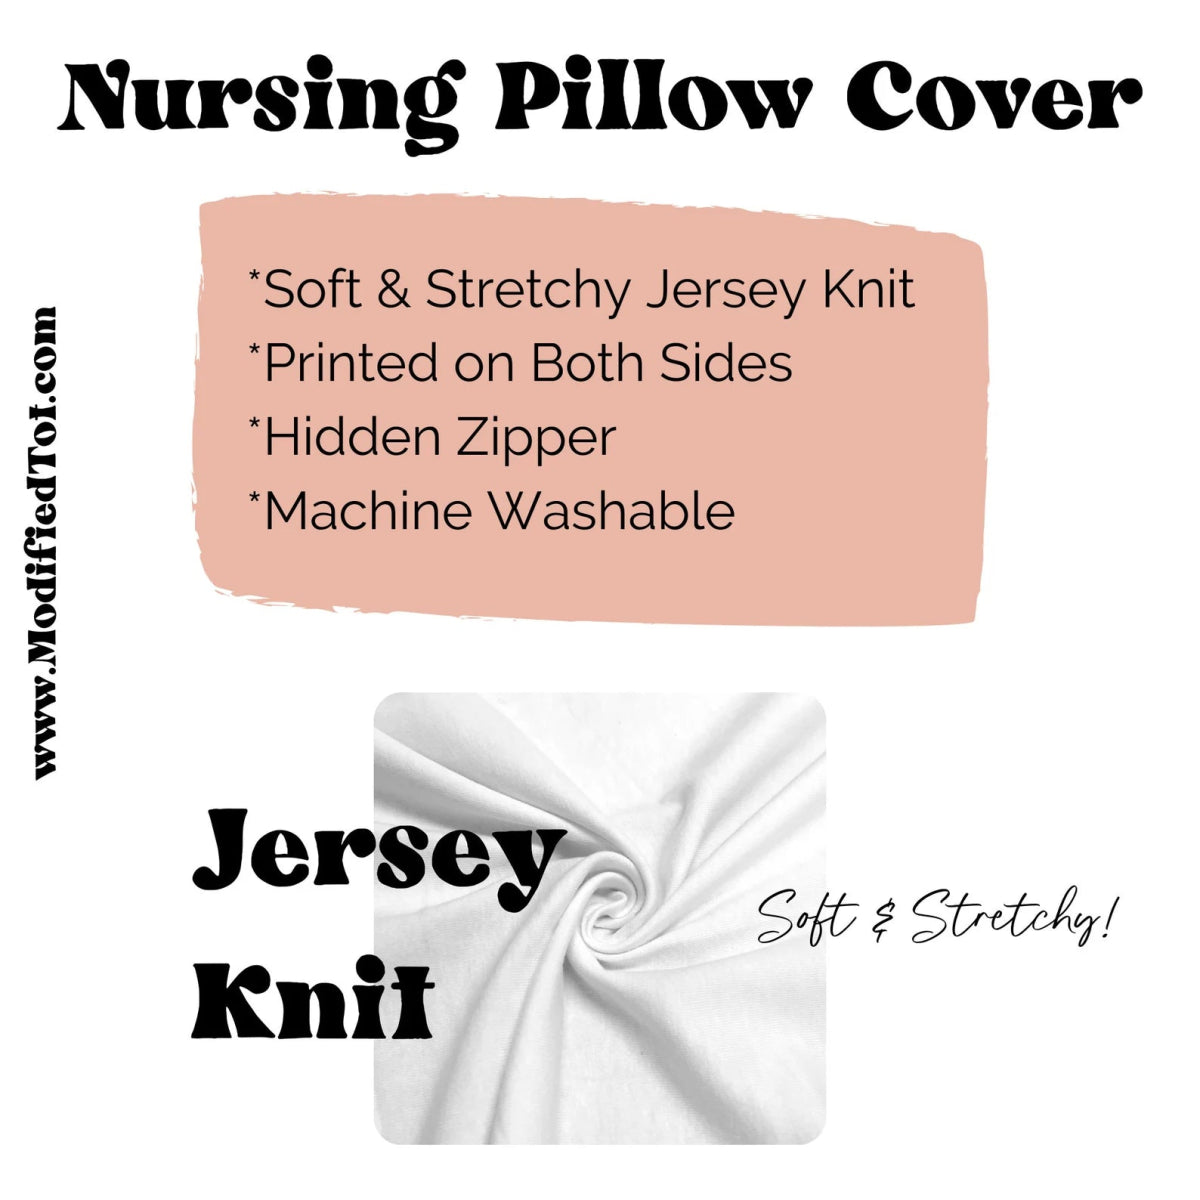 Moody Floral Nursing Pillow Cover - gender_girl, Moody Floral, Theme_Floral